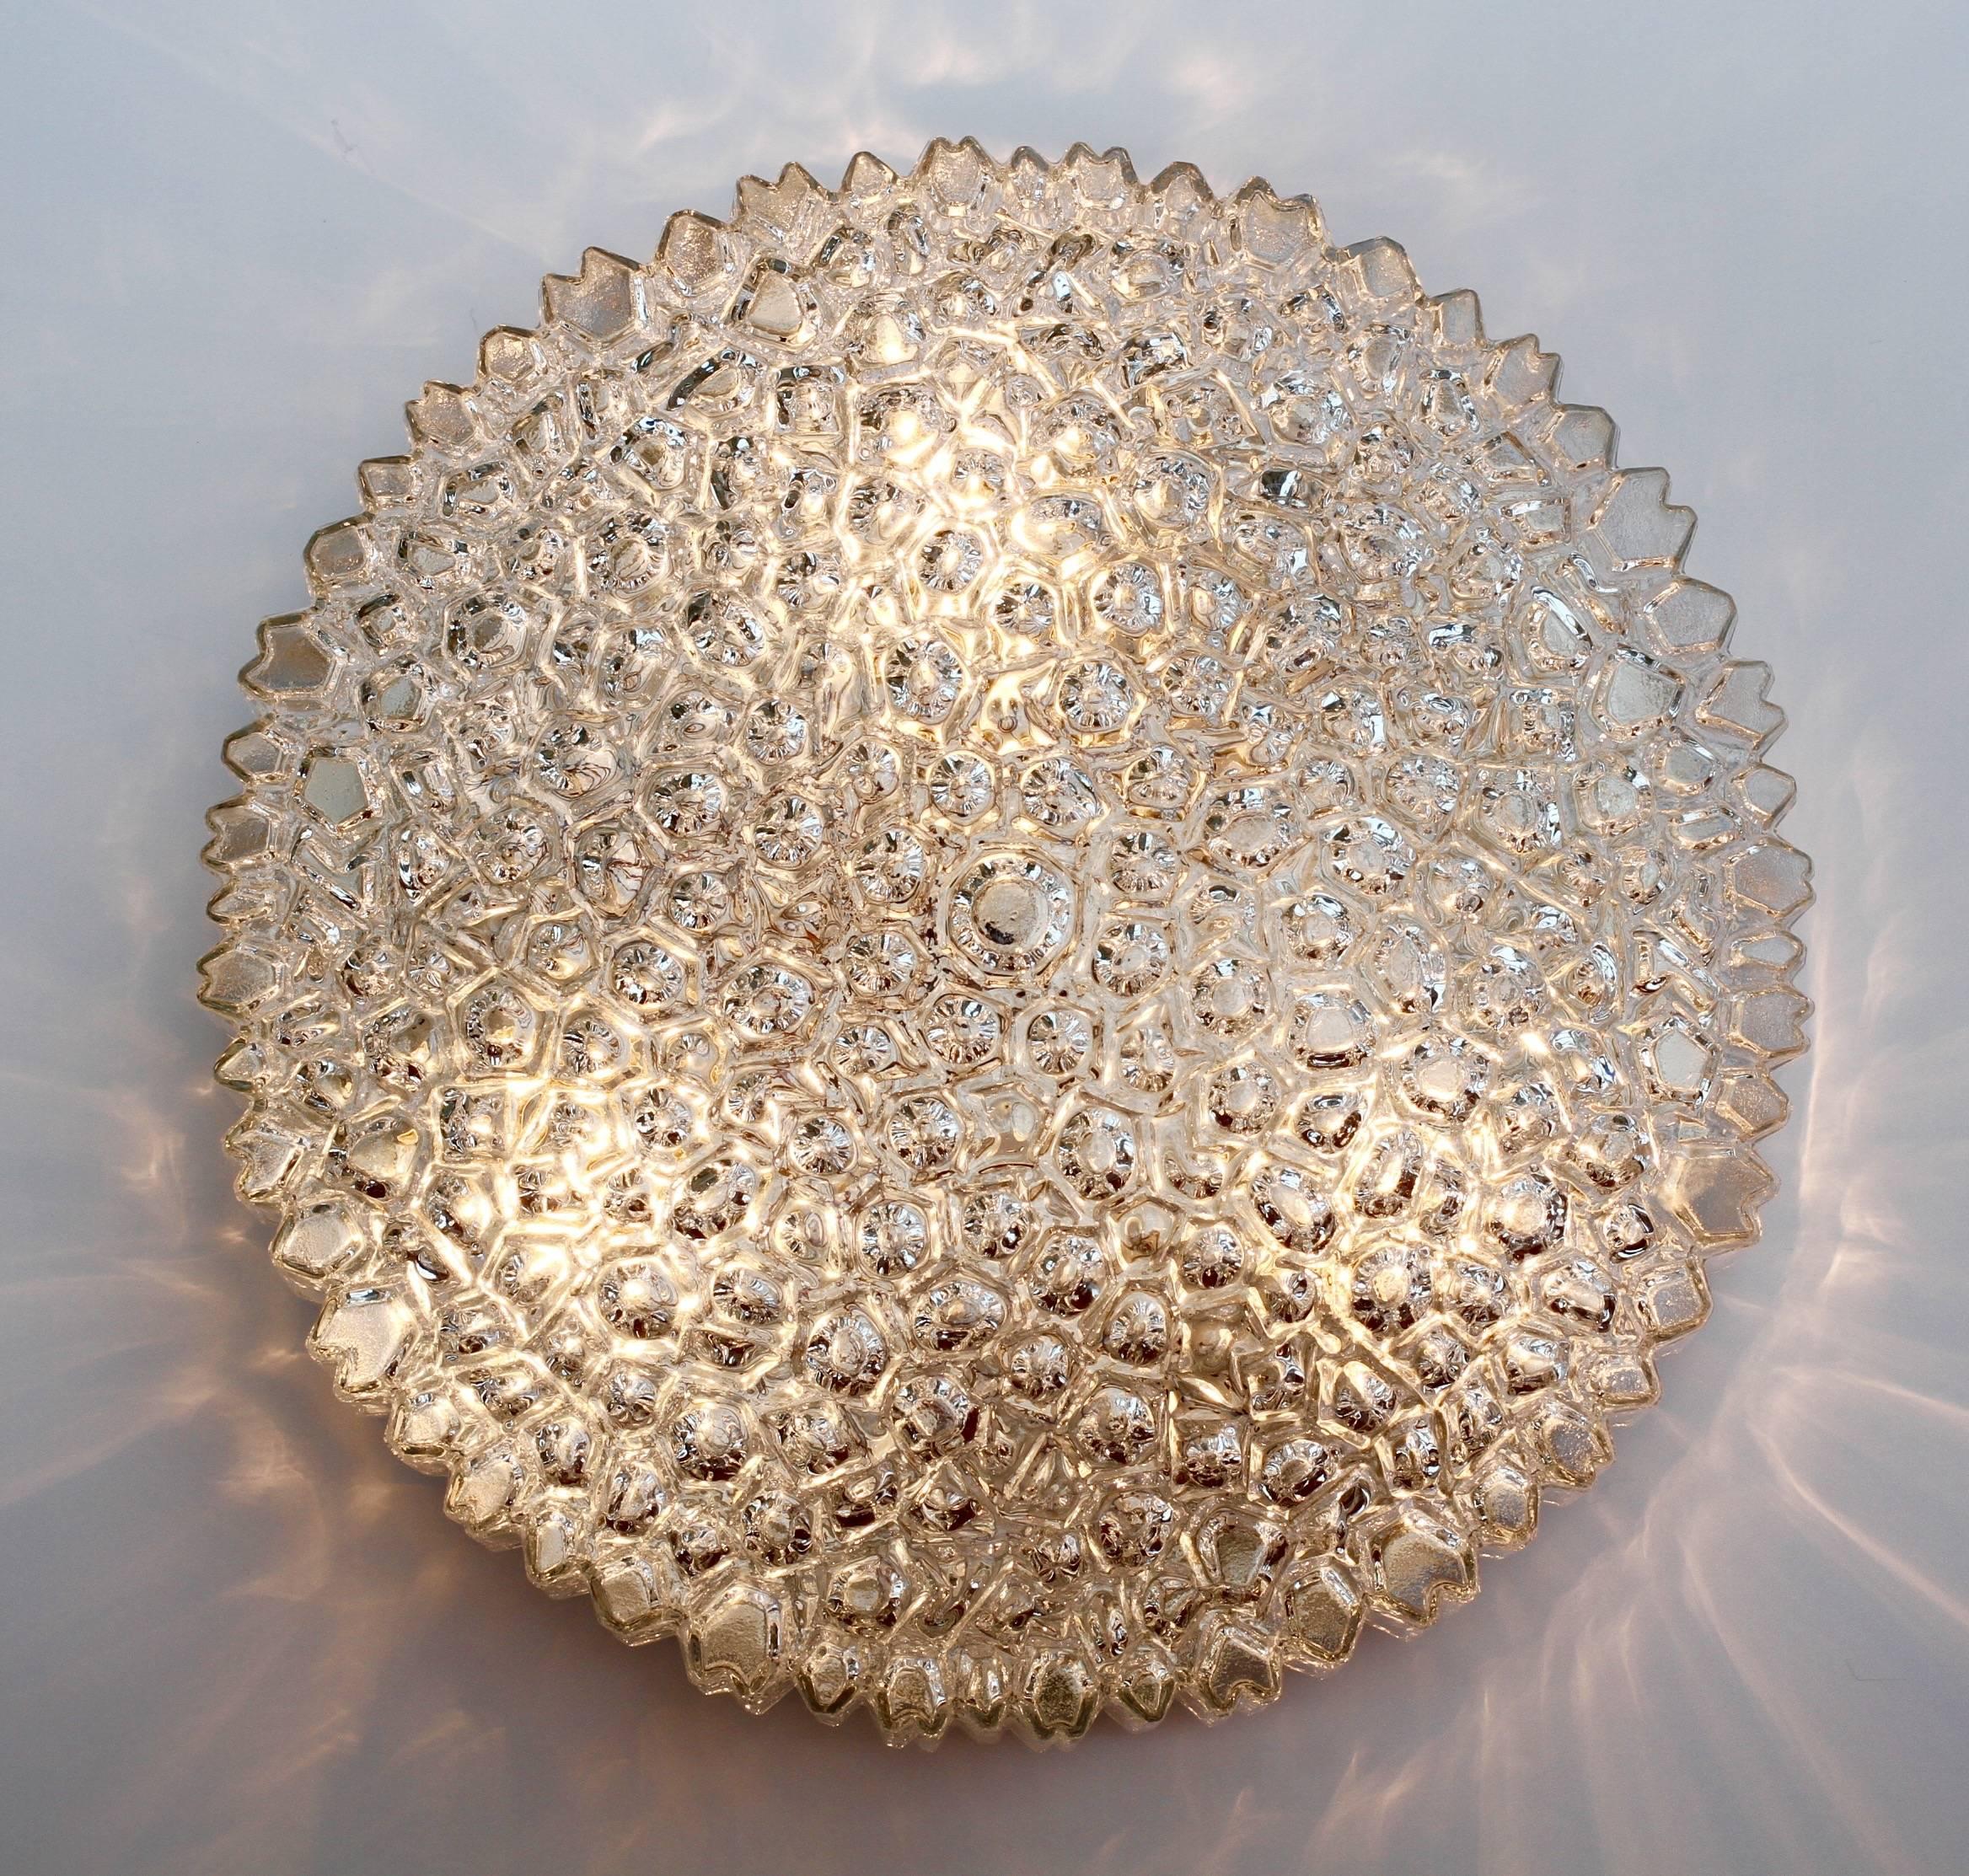 A beautiful and large flush mount light fixture by Glashütte Limburg, circa 1970s. Featuring a wonderful mouth blown, molded and textured clear glass shade resembling ice crystals, this Mid-Century vintage lamp illuminates beautifully, casting a